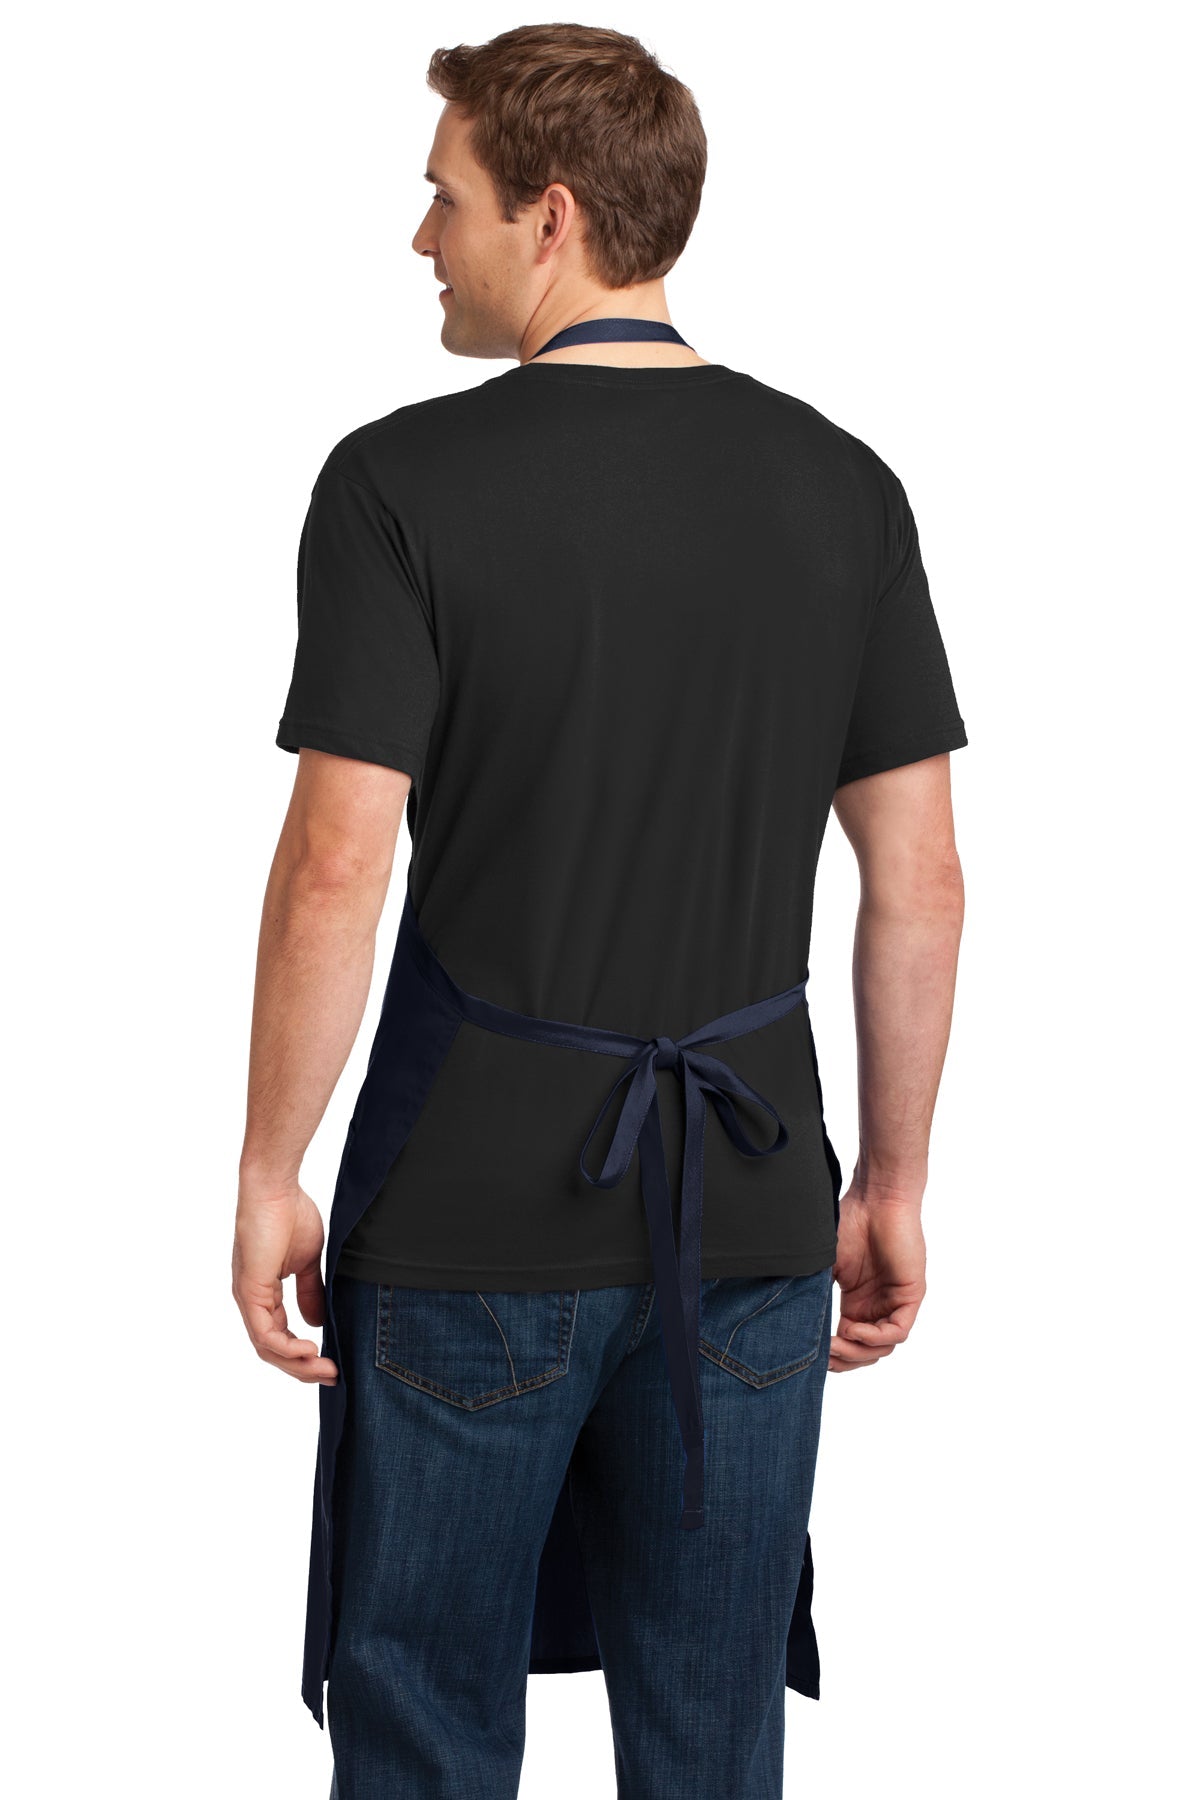 Port Authority Easy Care Customized Extra Long Bib Aprons with Stain Release, Navy